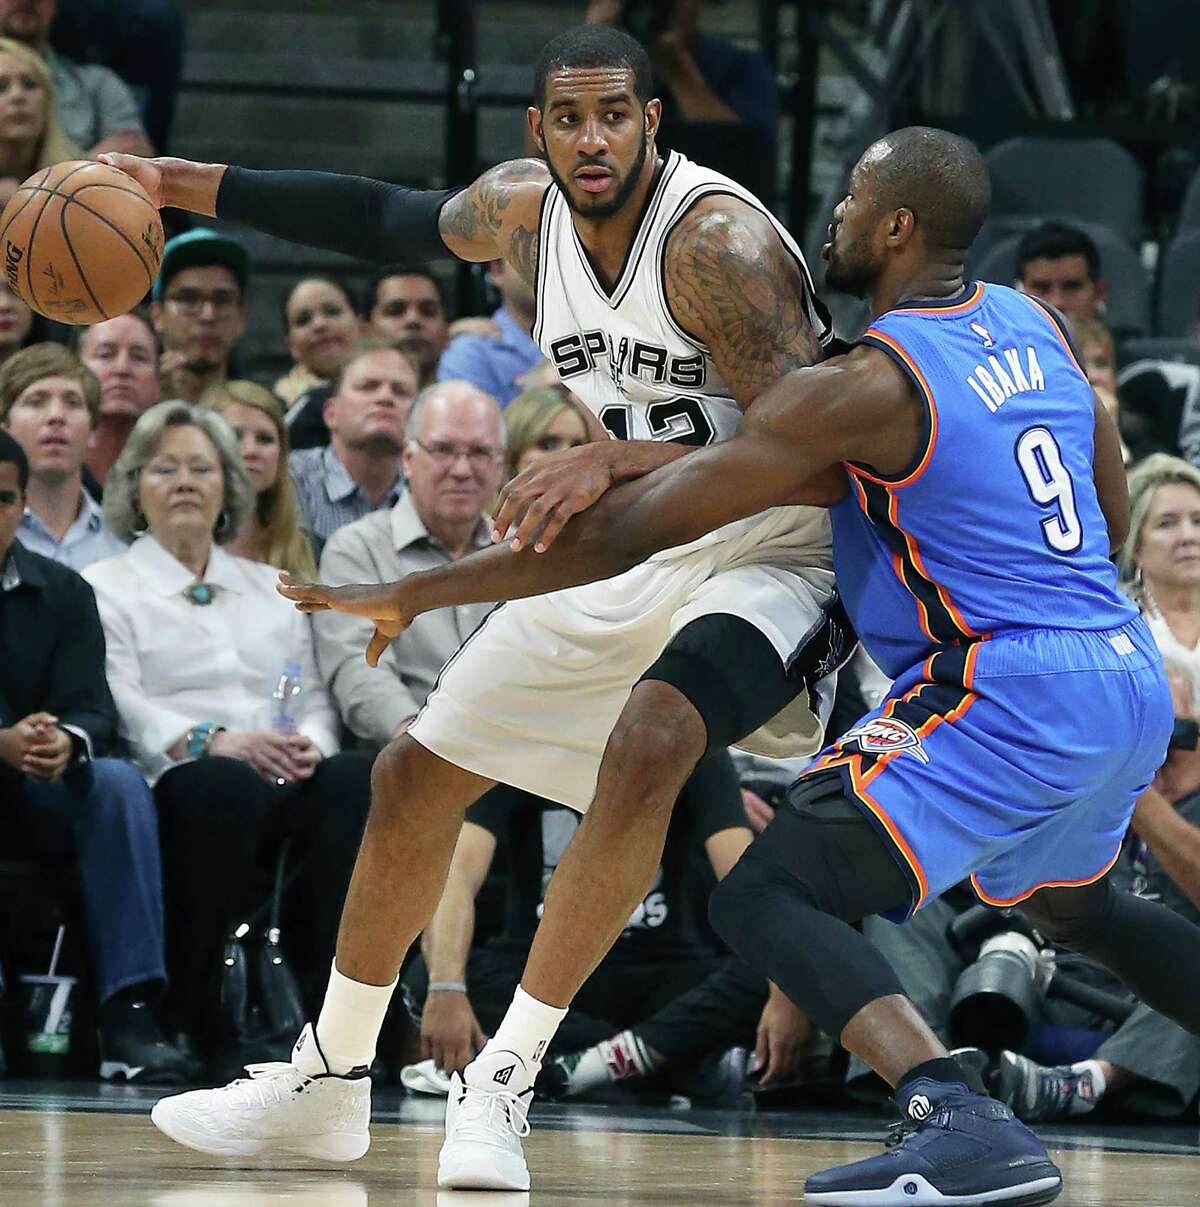 LaMarcus Aldridge pivots on Serge Ibaka as the Spurs host the Thunder in game 2 of second round NBA playoff action at the AT&T Center on May 2, 2016.